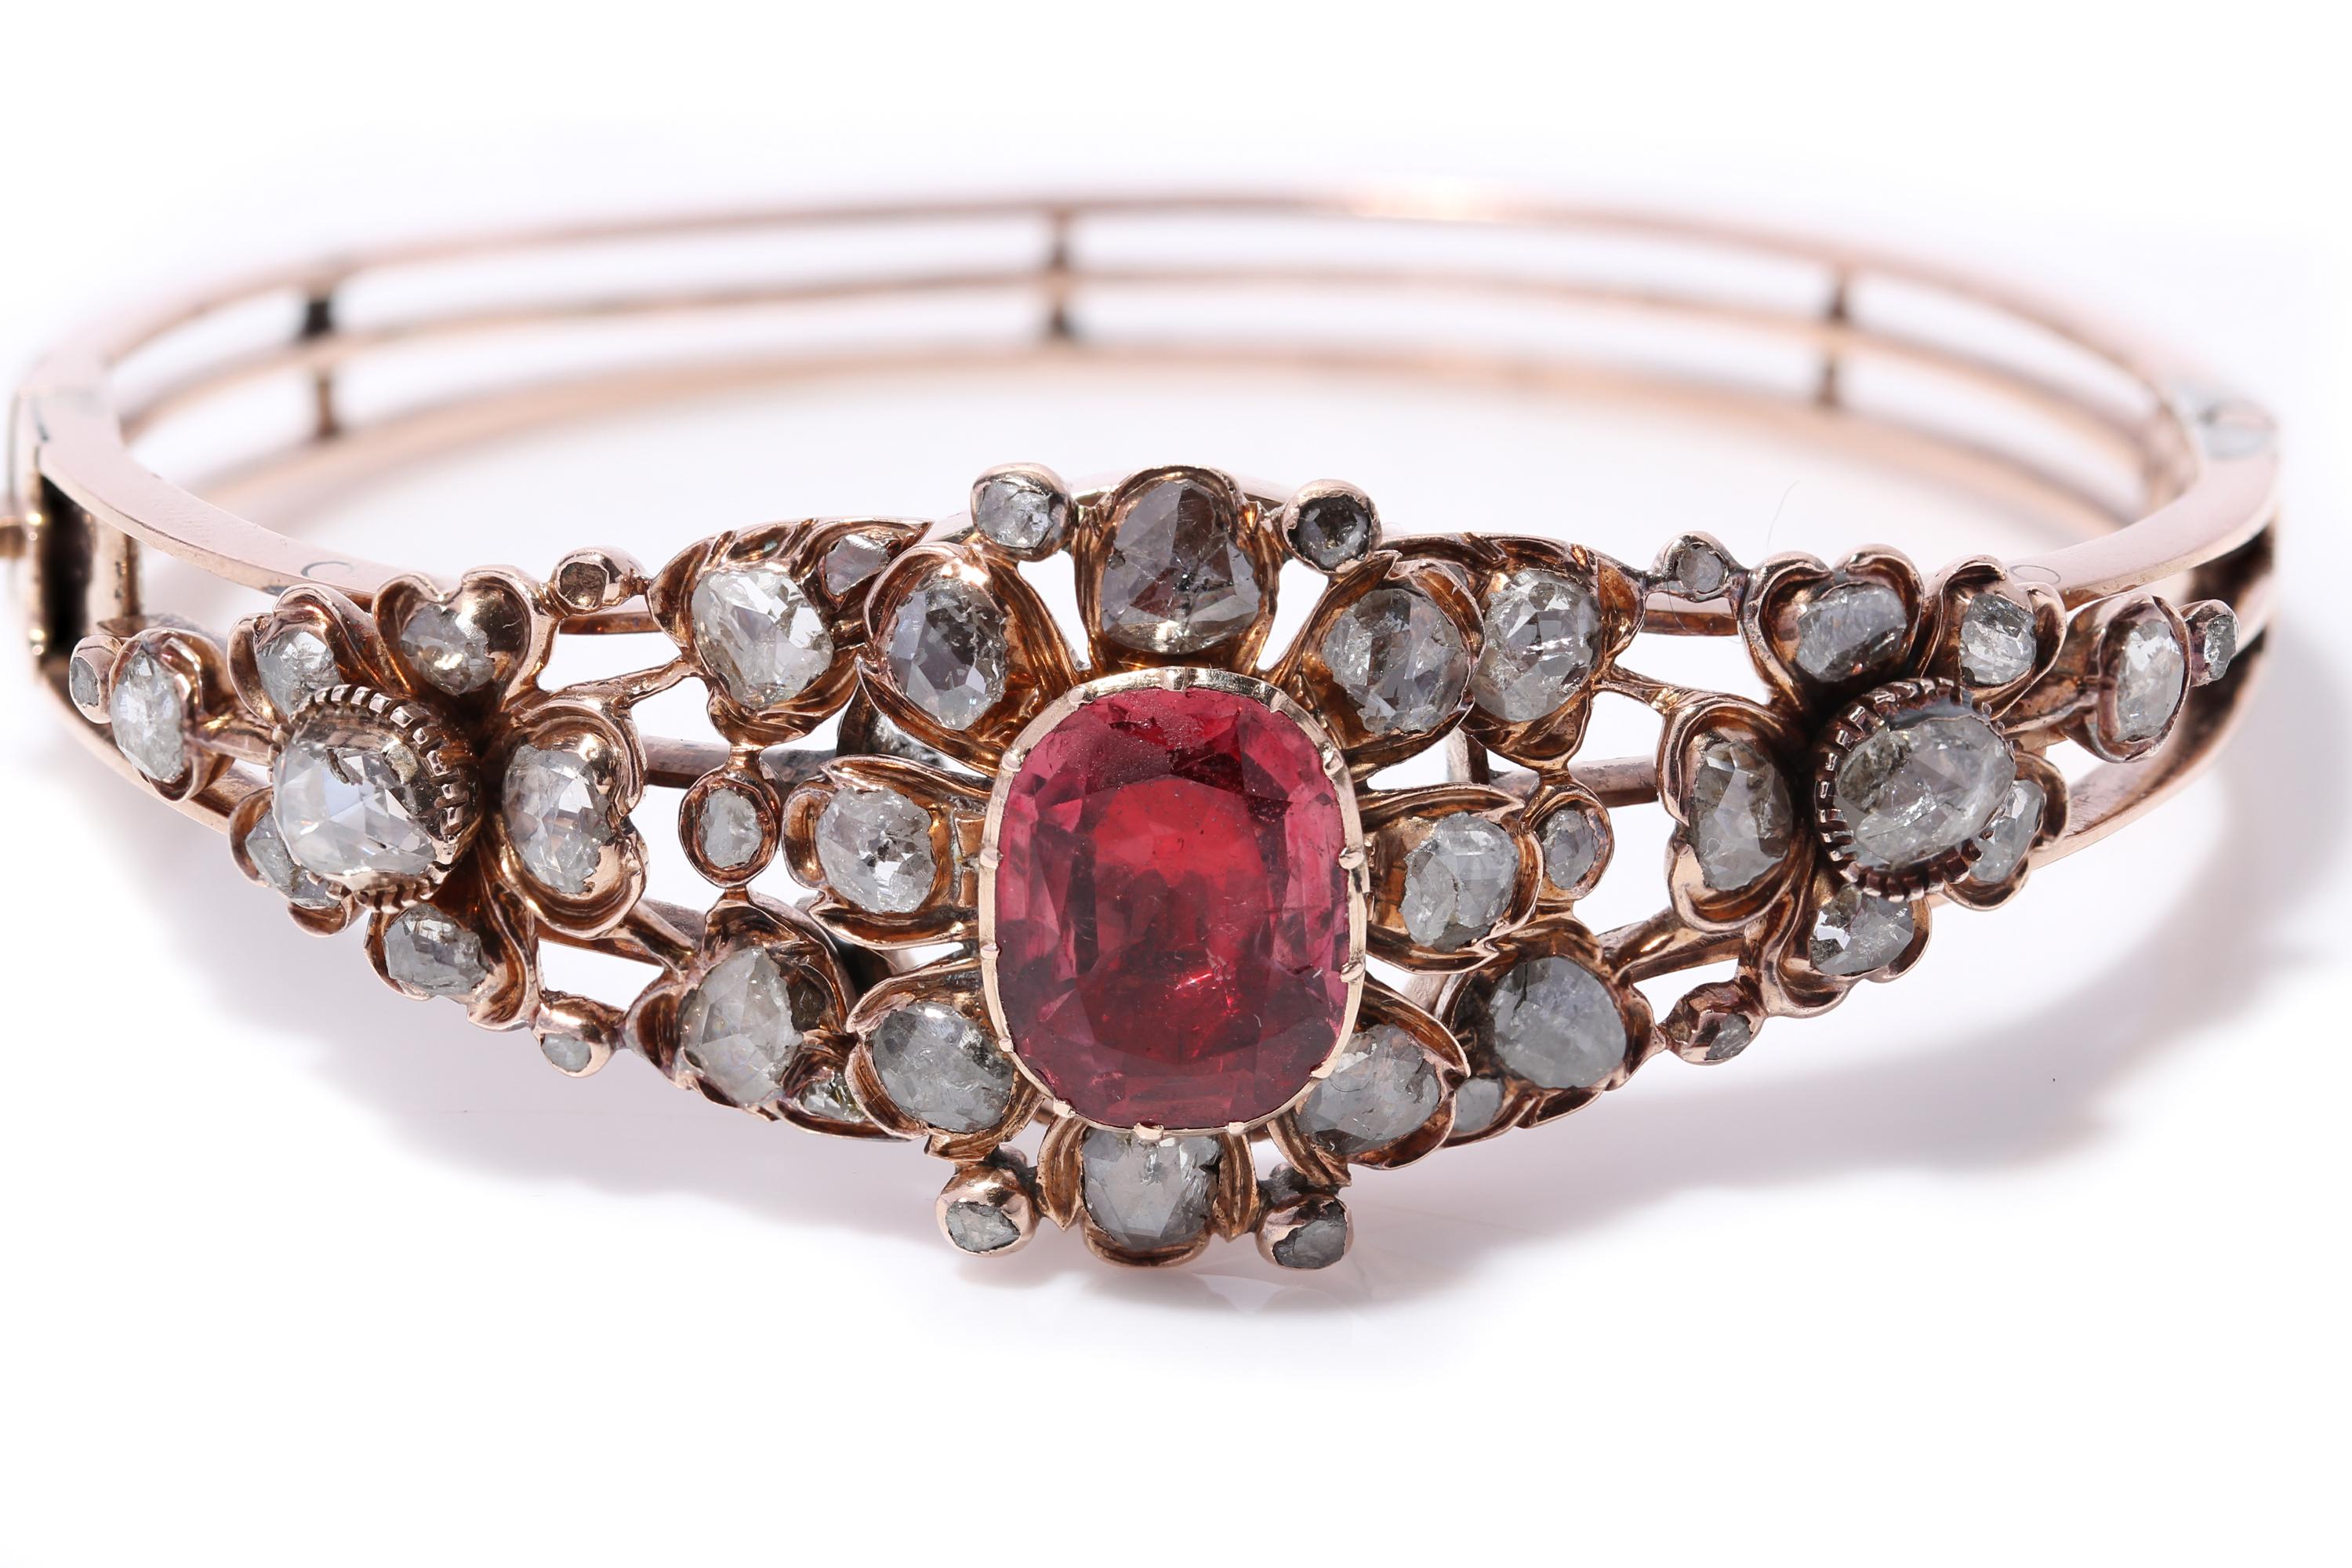 Women's Victorian 15kt Rose Gold Ladies Bangle with 4.00 Ct Spinel and 4.52 Ct Diamond For Sale